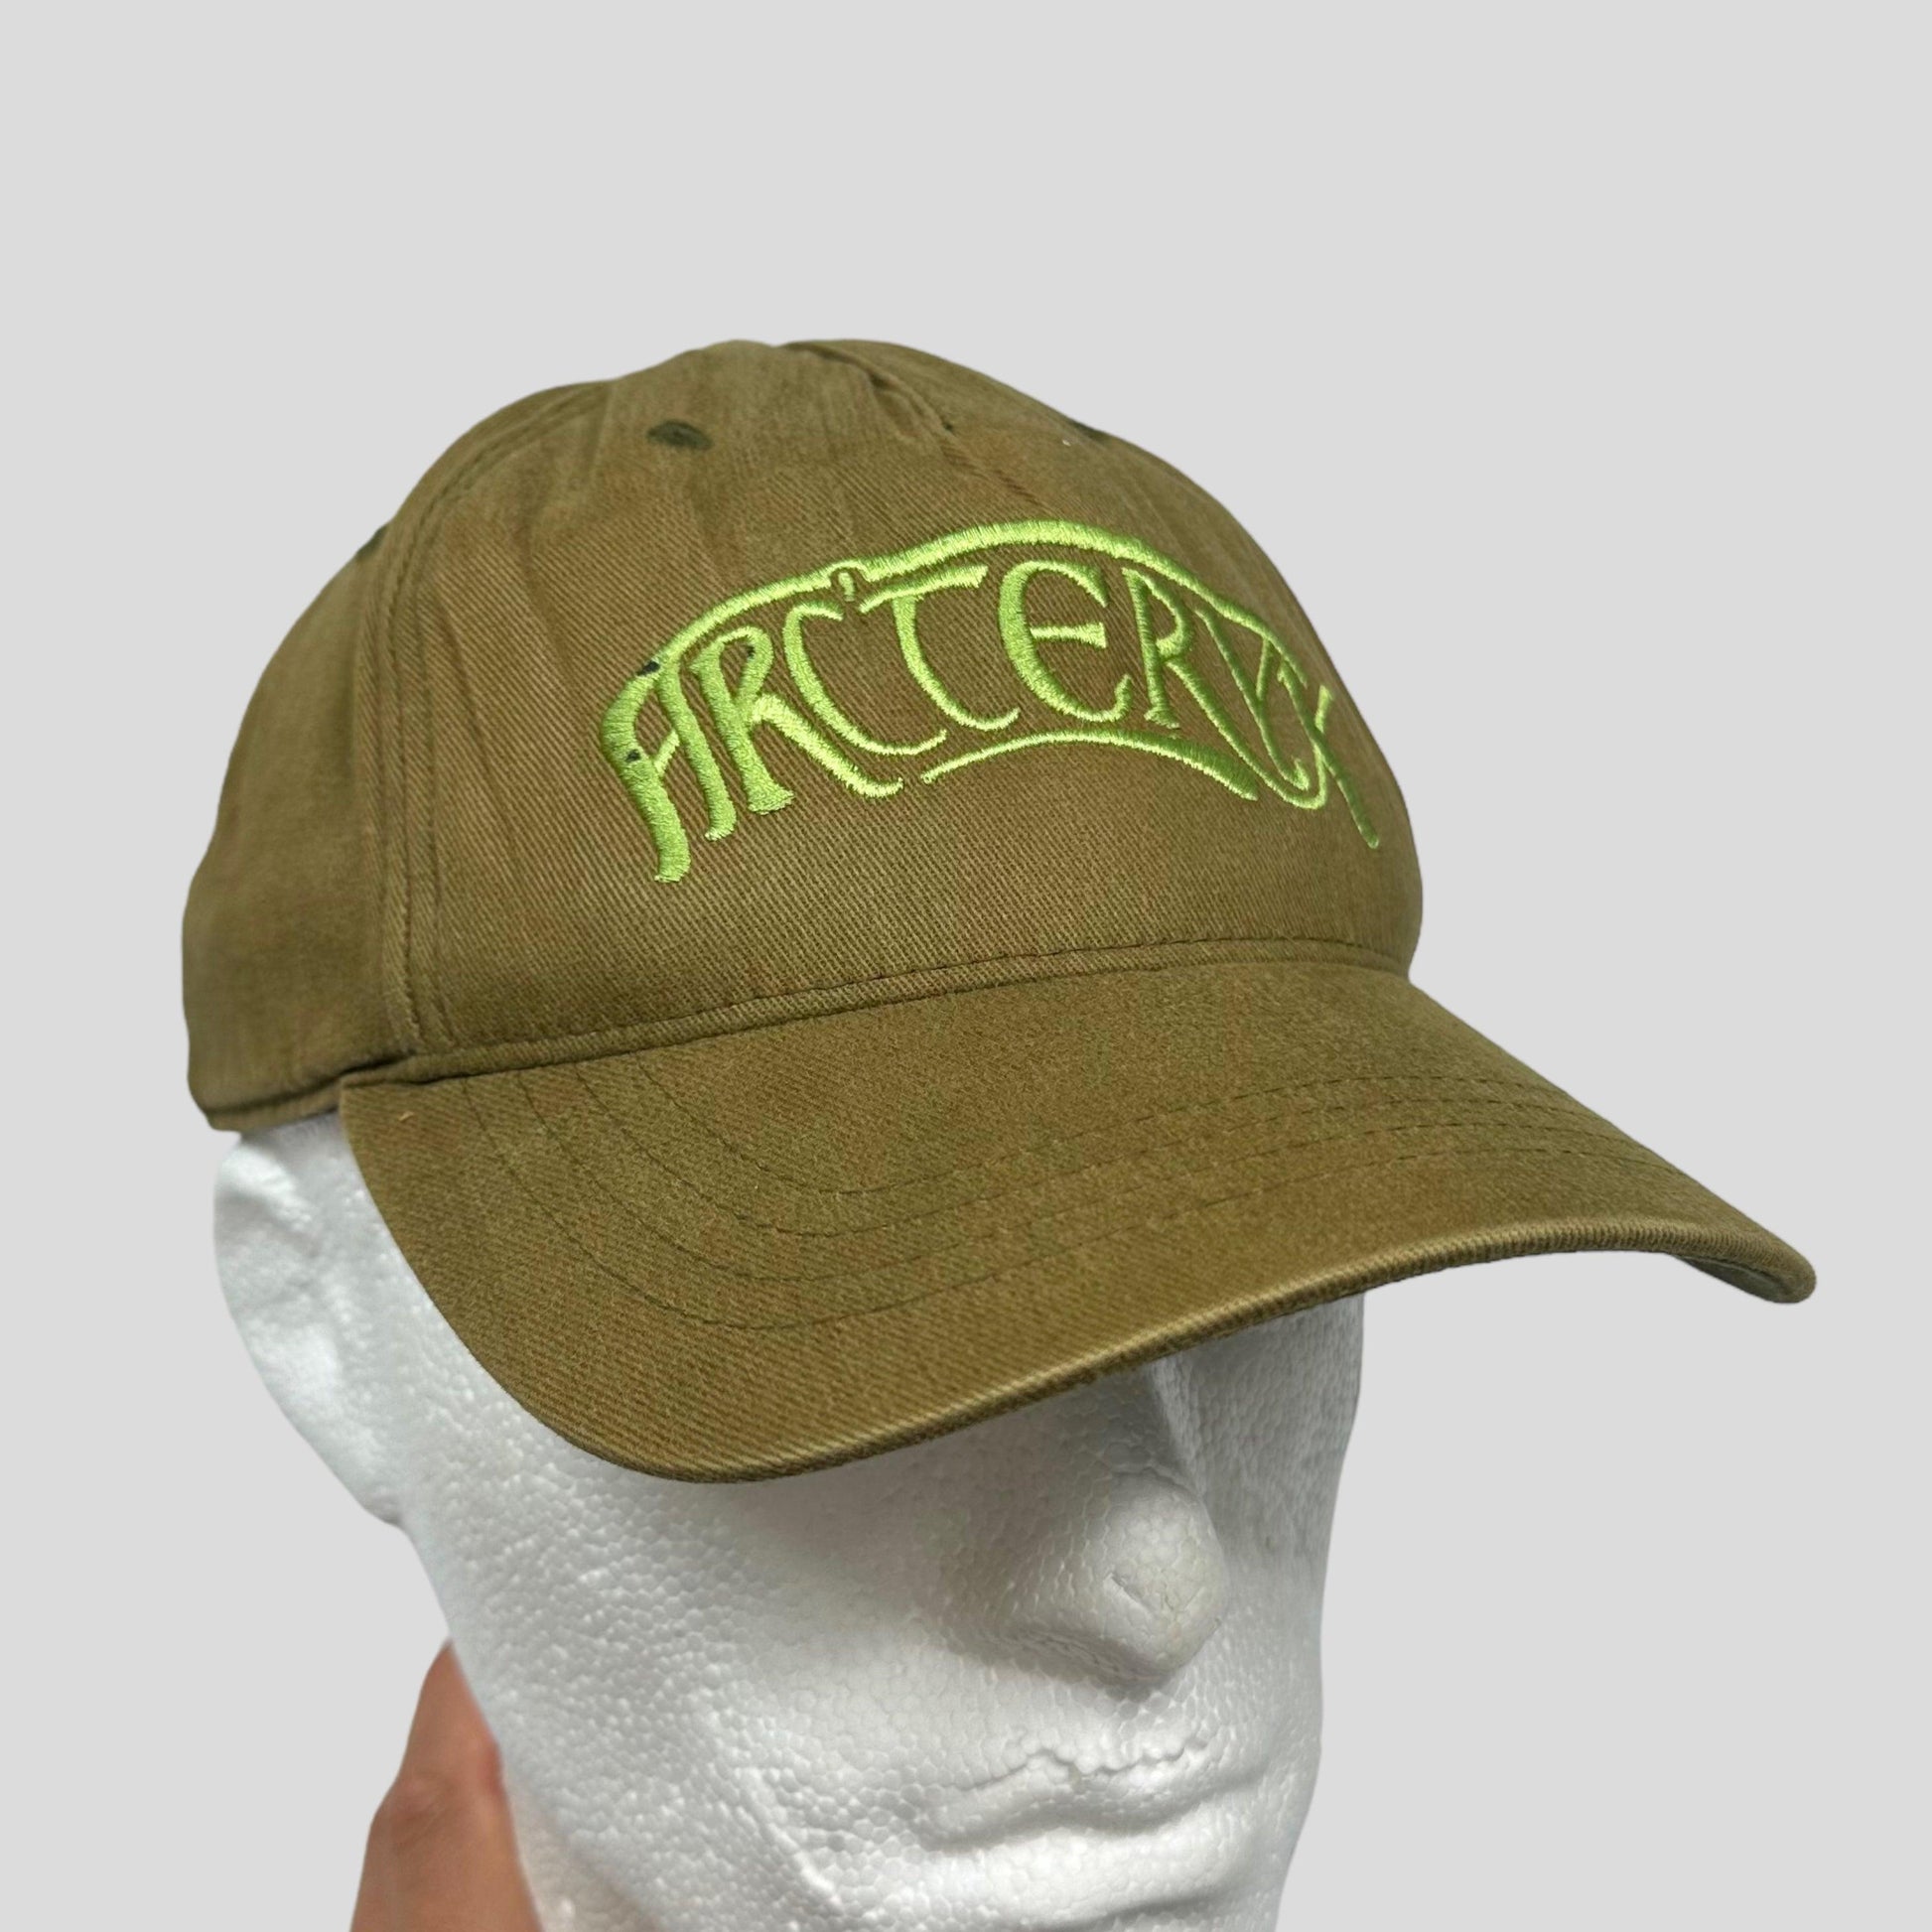 Arc’teryx 2014 Embroidered Baseball Cap - OS - Known Source